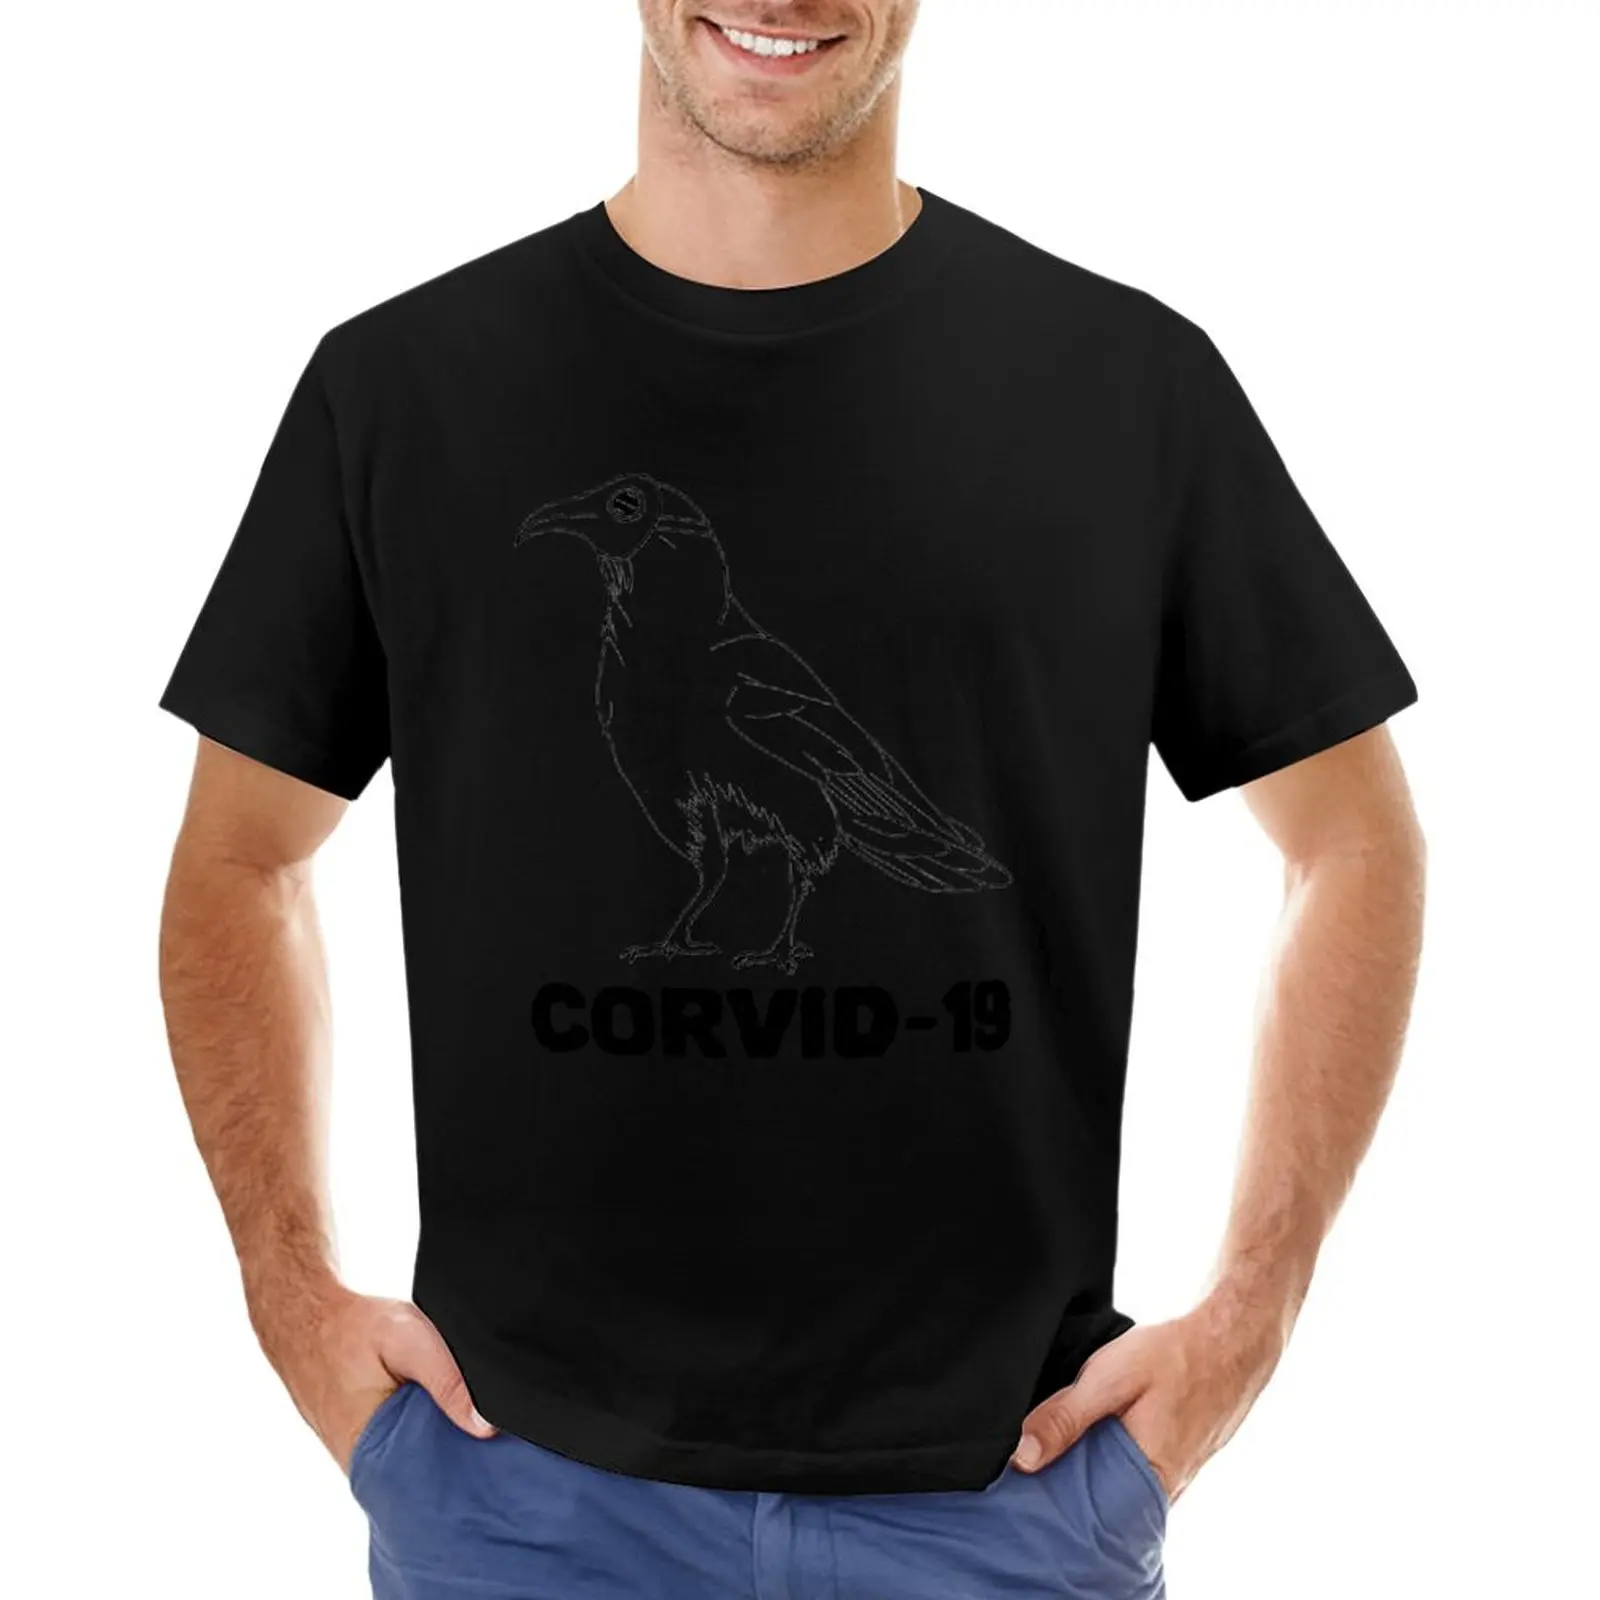 

Corvid-19 T-Shirt tees oversizeds sports fans new edition mens funny t shirts